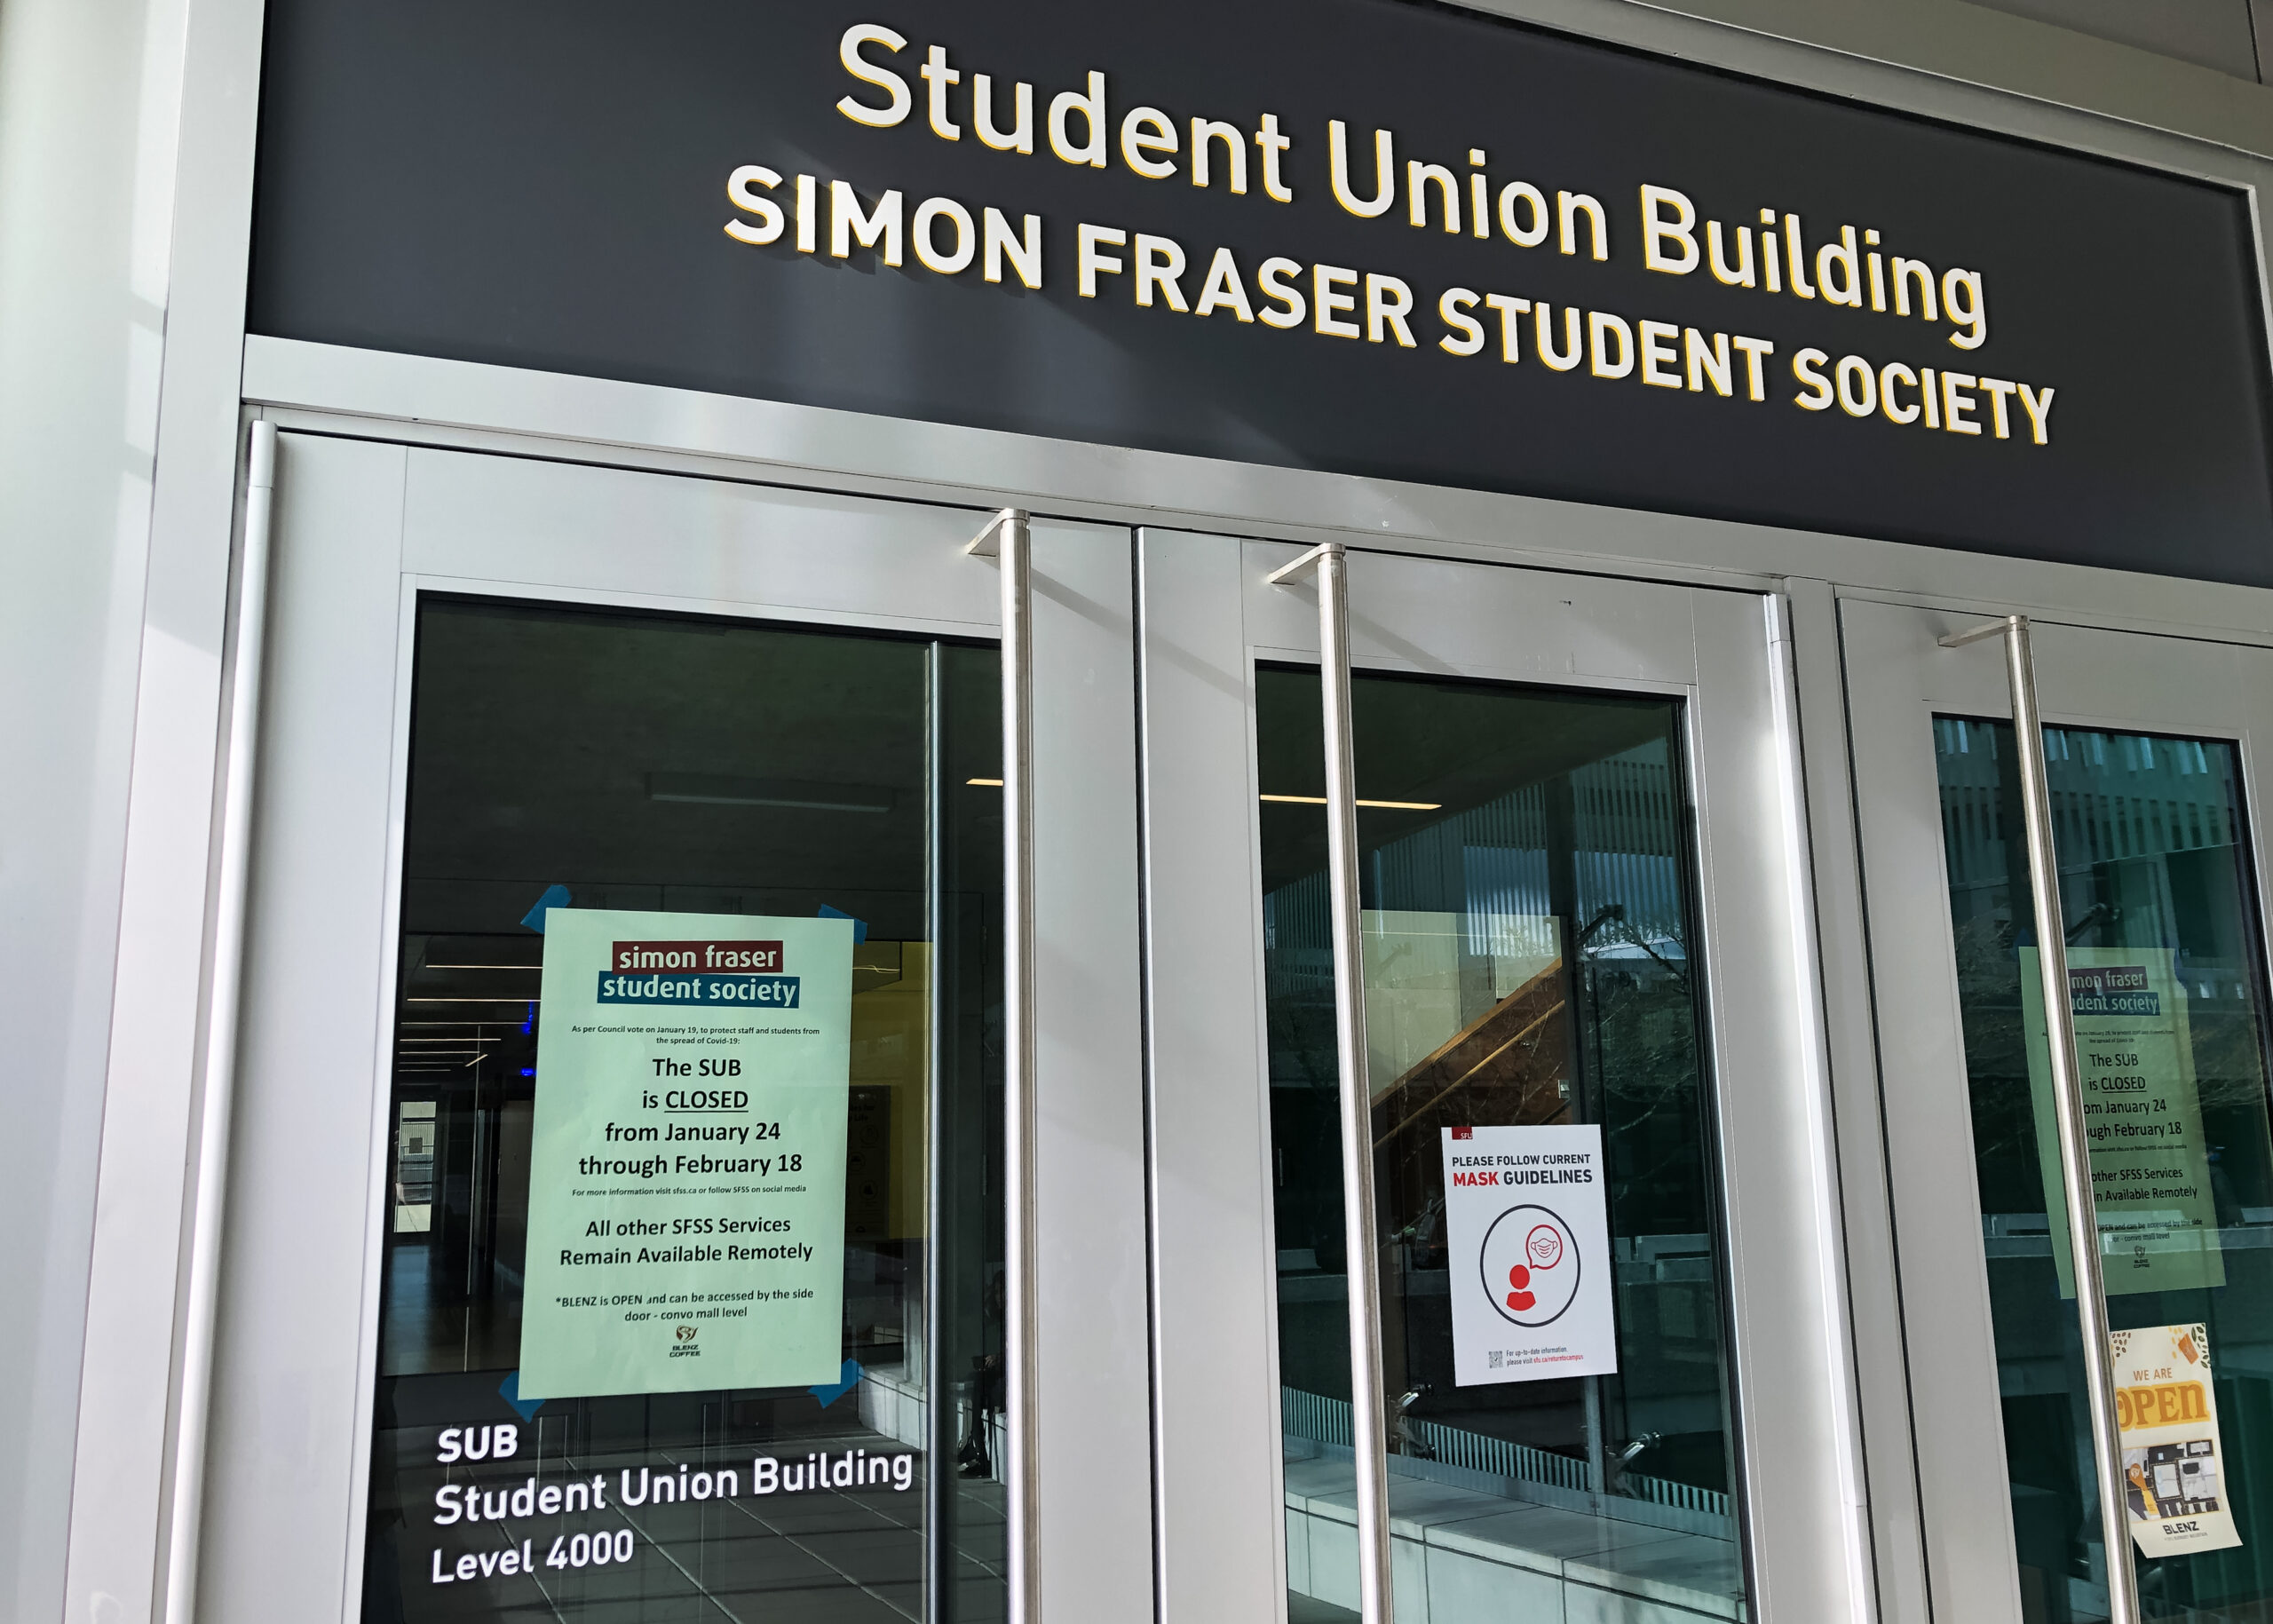 A photo of the Student Union Building. The doors are shown with a note from the SFSS taped to the inside, reading: “The SUB is closed from January 24 through February 18.”